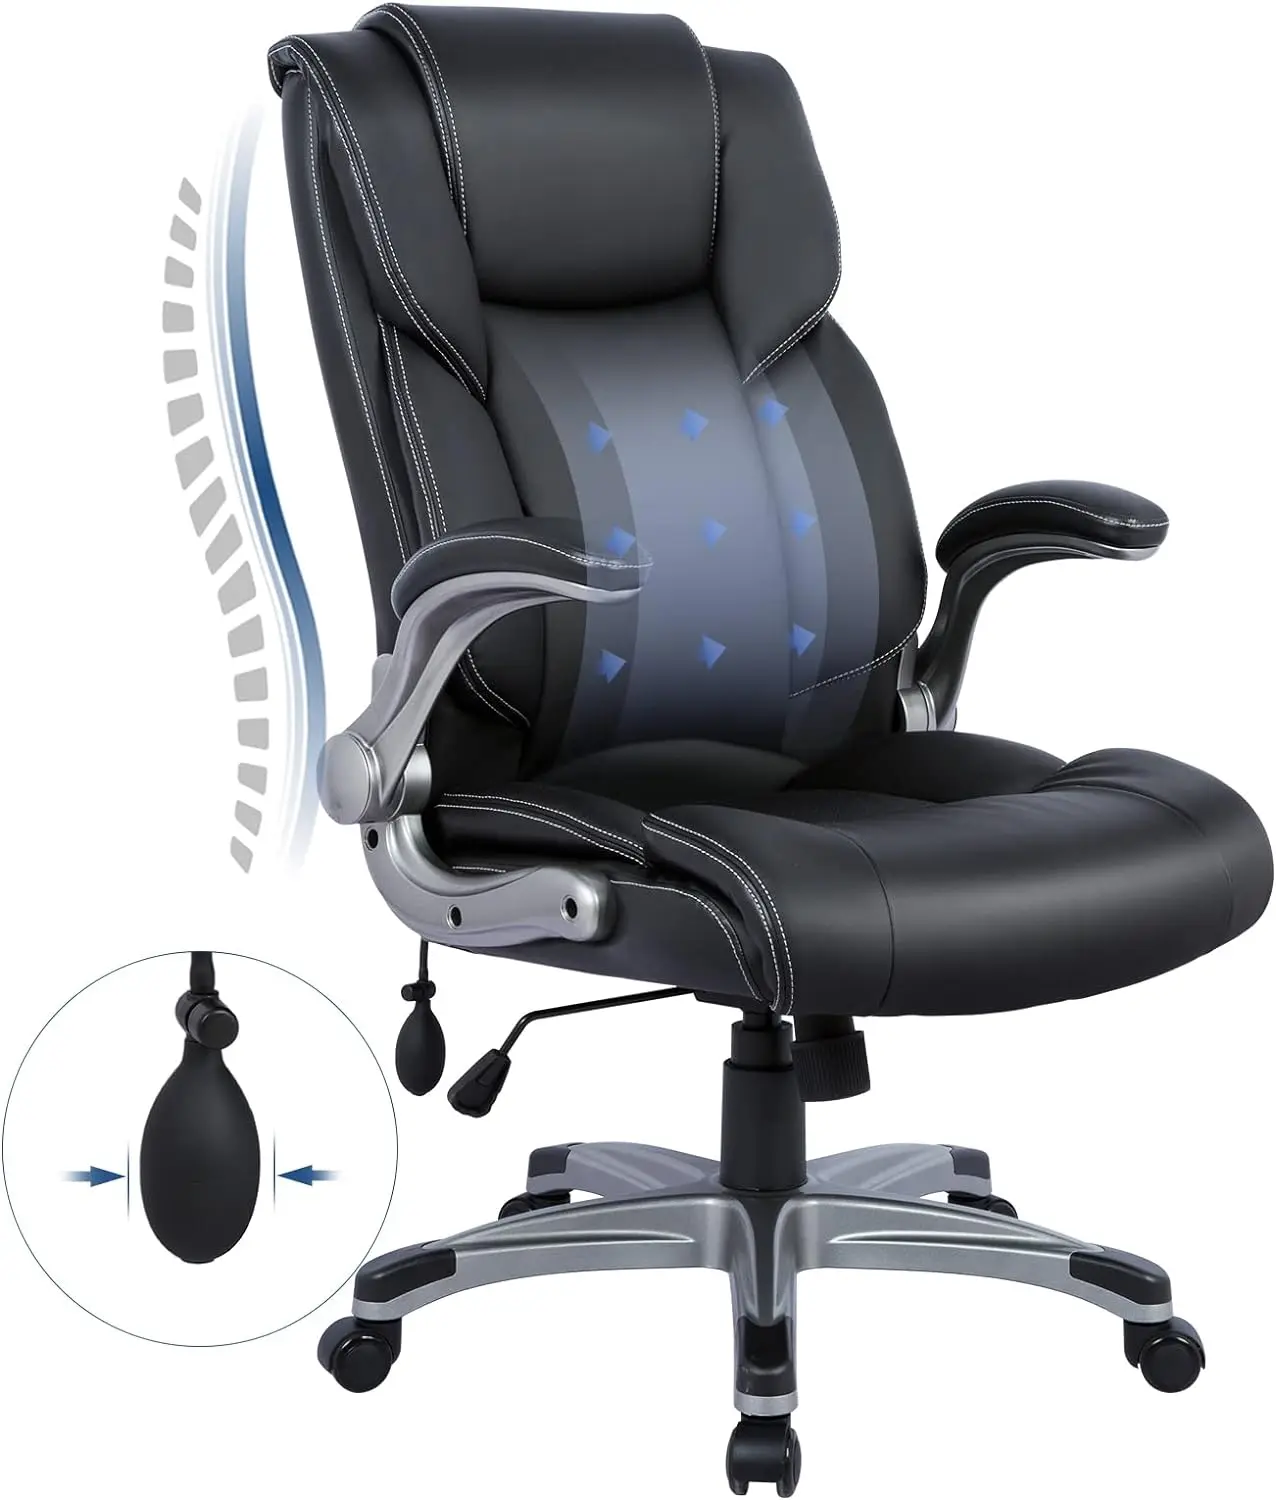 https://ae01.alicdn.com/kf/S5e0589c1bfe44ef1b1ccb6d0596729cbR/High-Back-Executive-Office-Chair-Ergonomic-Home-Computer-Desk-Leather-Chair-with-Padded-Flip-up-Arms.jpg